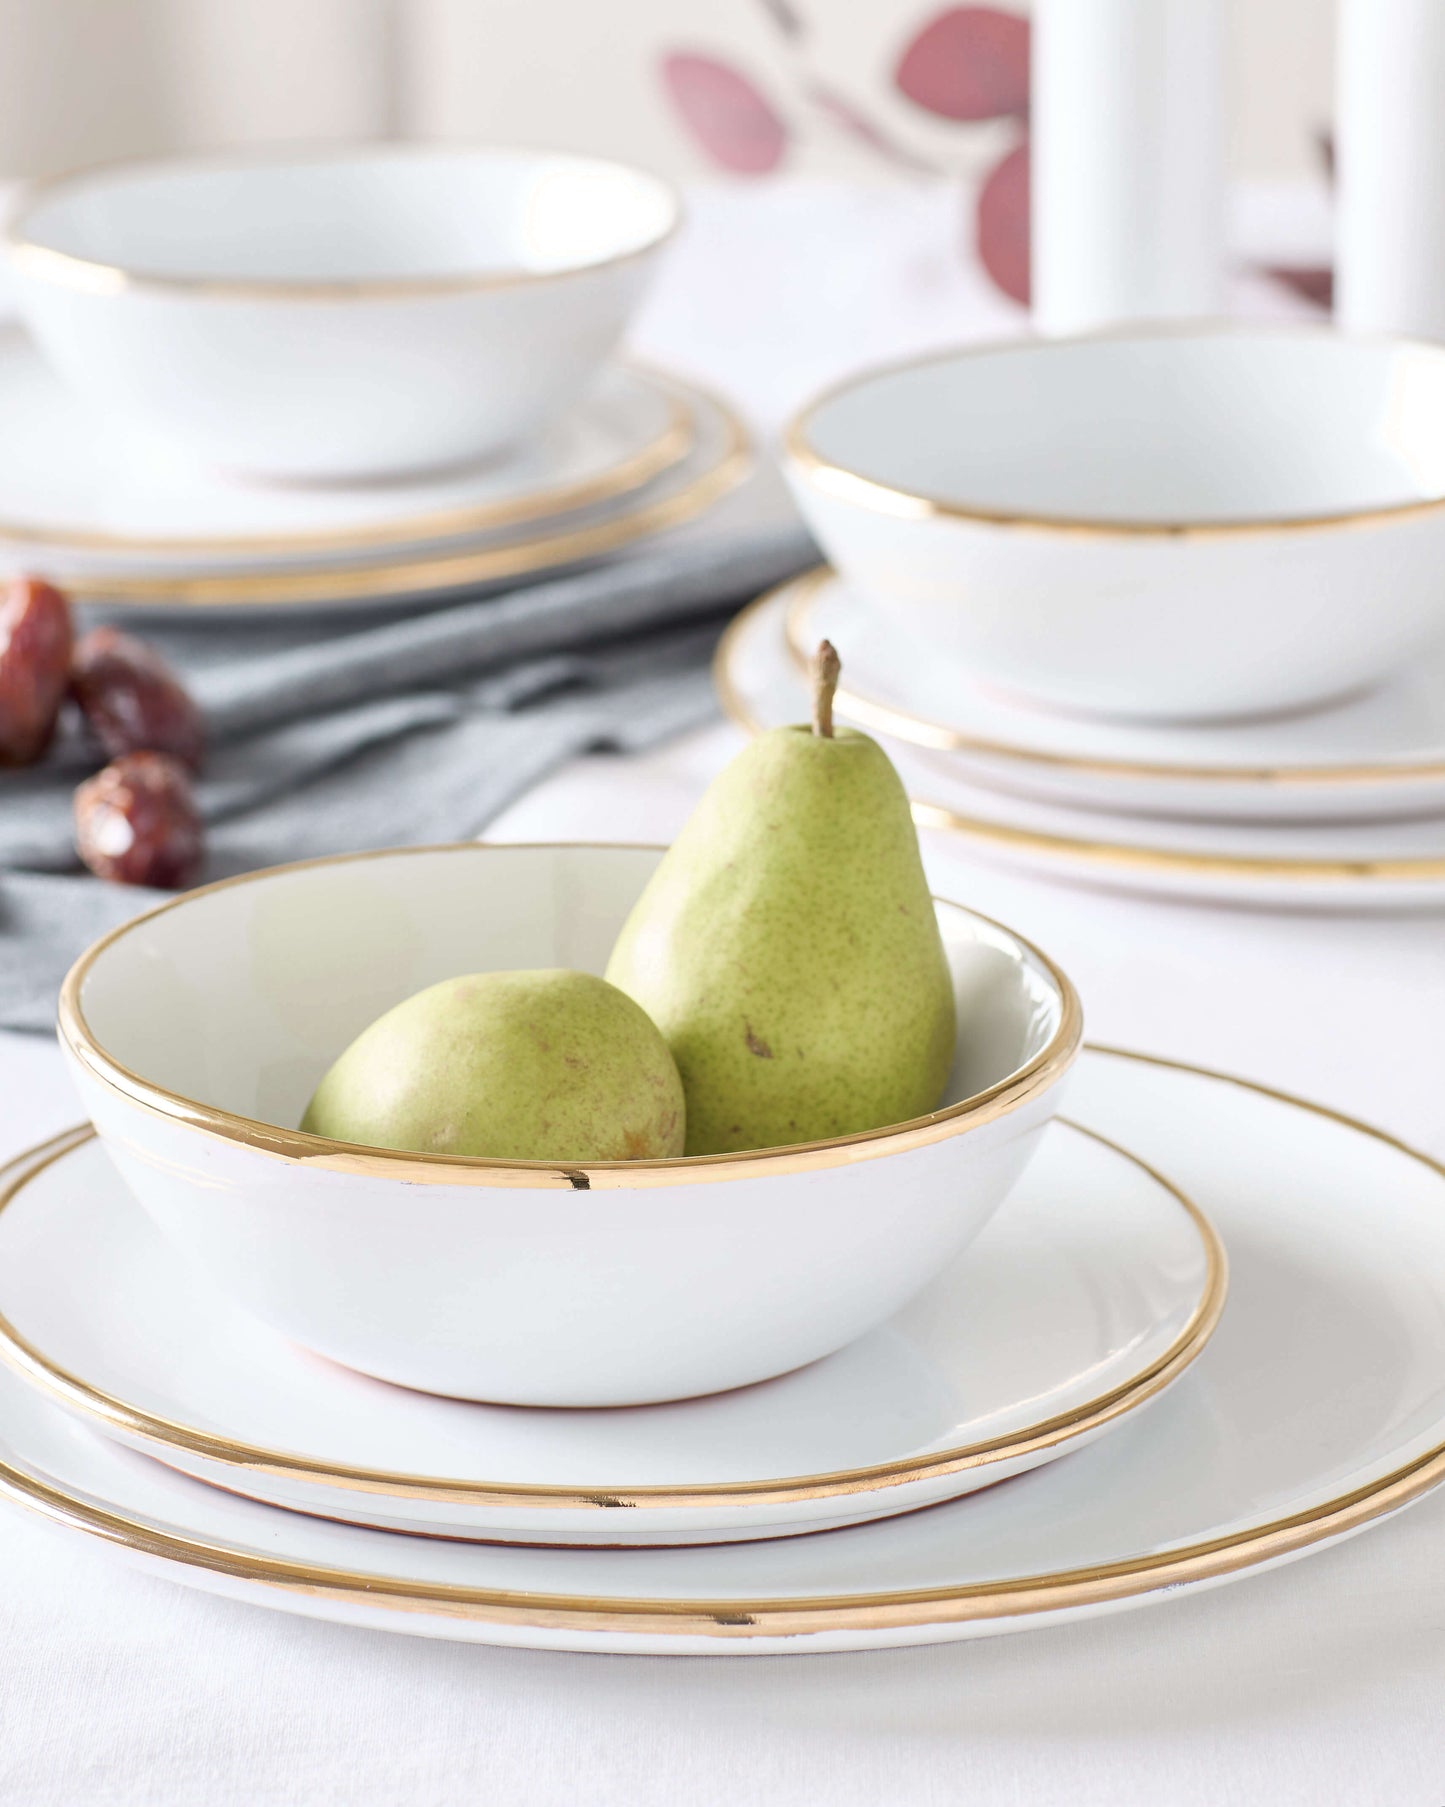 
                  
                    Fairkind's Fez Gold-Rimmed Dinnerware styled on a white table with pears.
                  
                